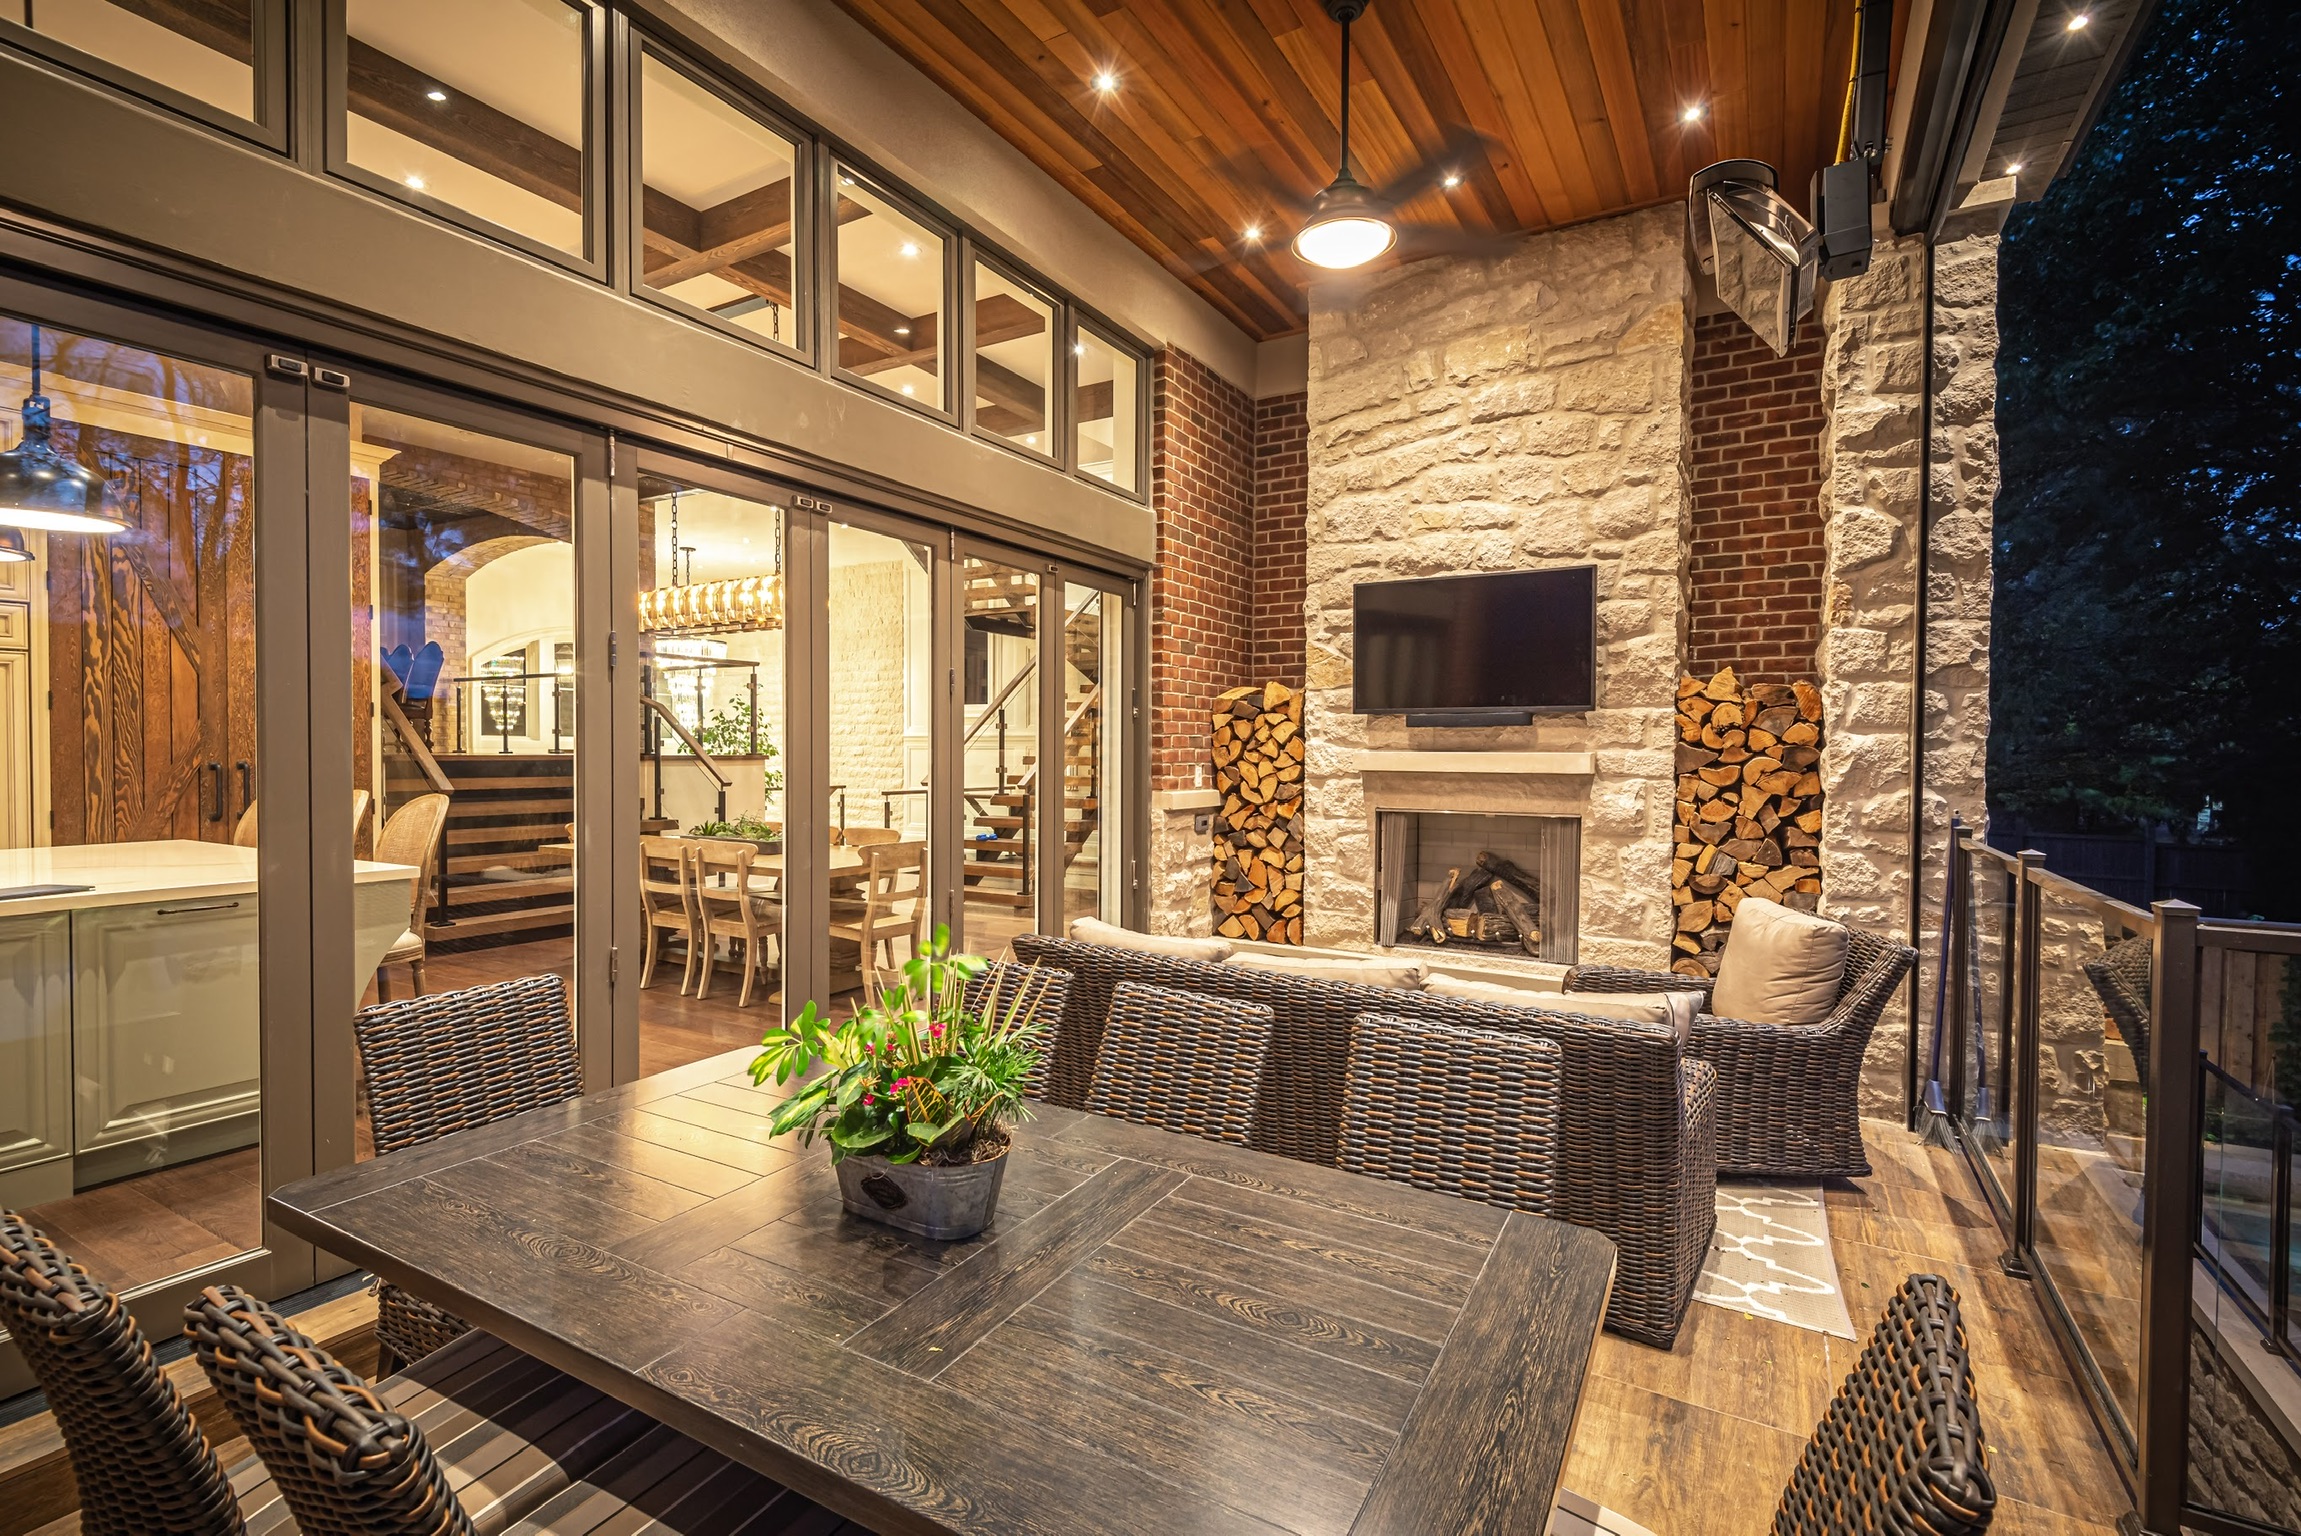 Covered deck with brick wall, floor to ceiling window and stone fireplace.